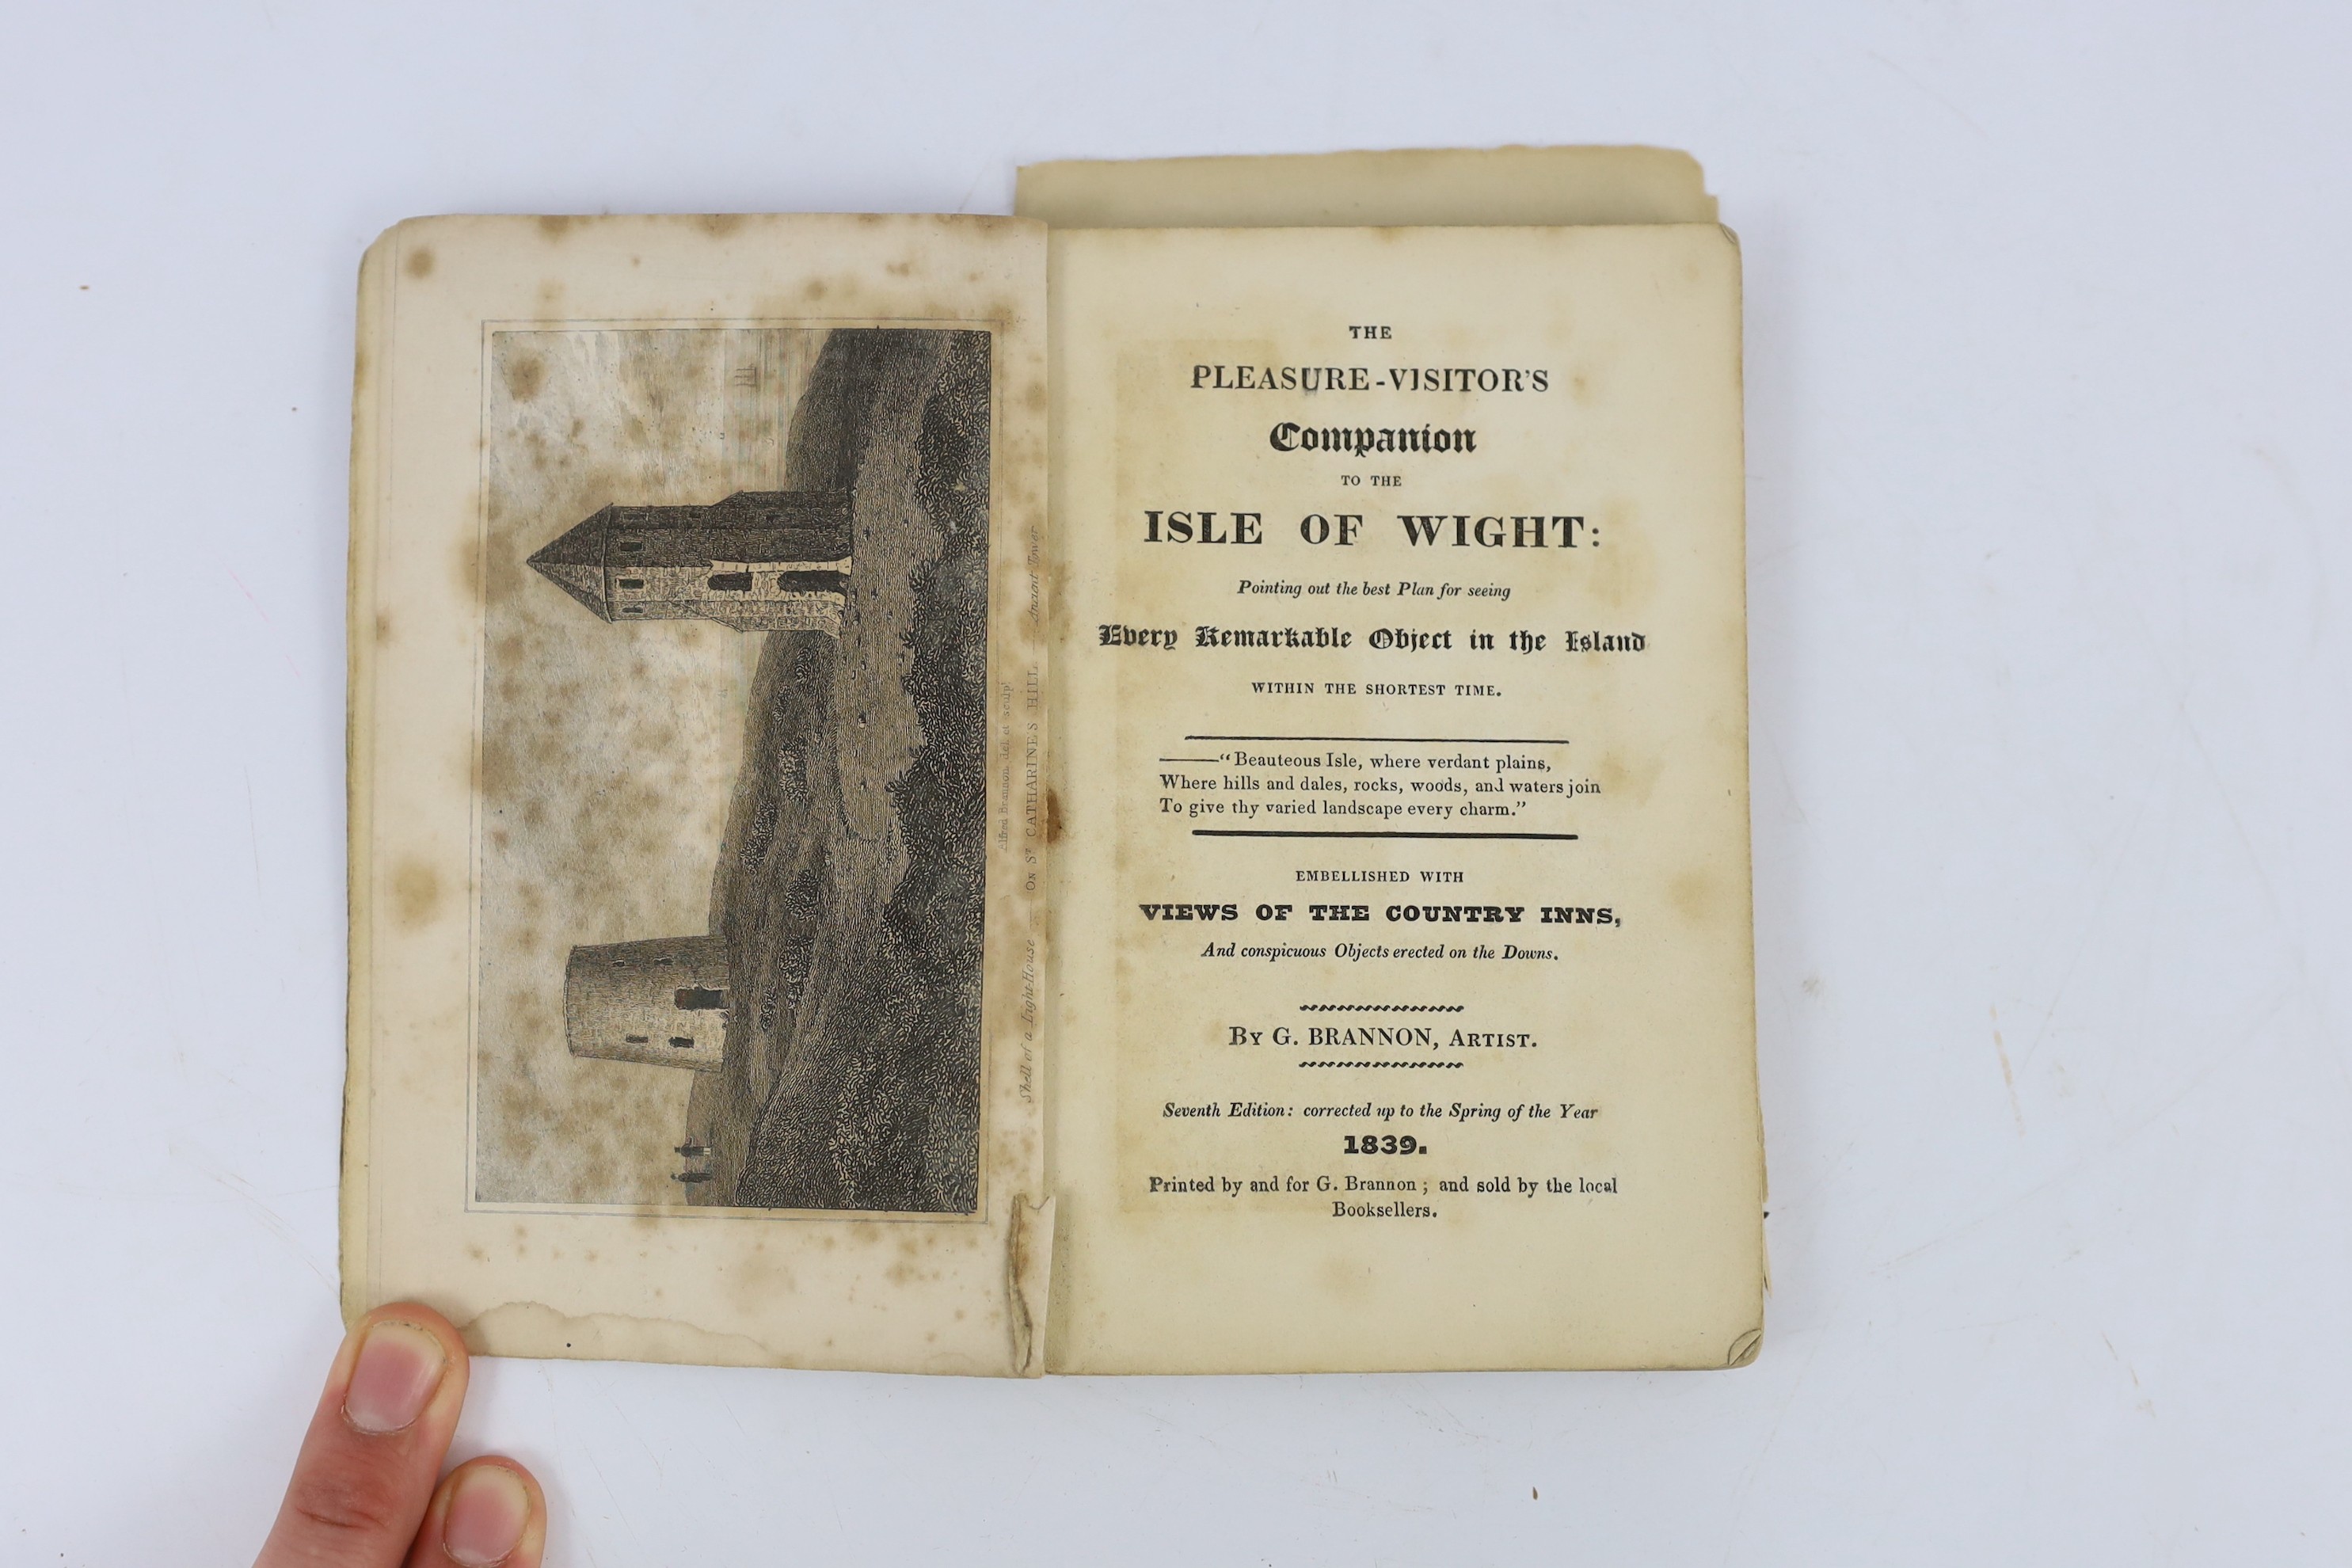 ISLE OF WIGHT: Bullar, John - A Historical and Picturesque Guide to the Isle of Wight. 5th edition. frontis.; original printed boards (rebacked), uncut, Southampton, 1823; Brannon, George - The Pleasure - Visitor's Compa